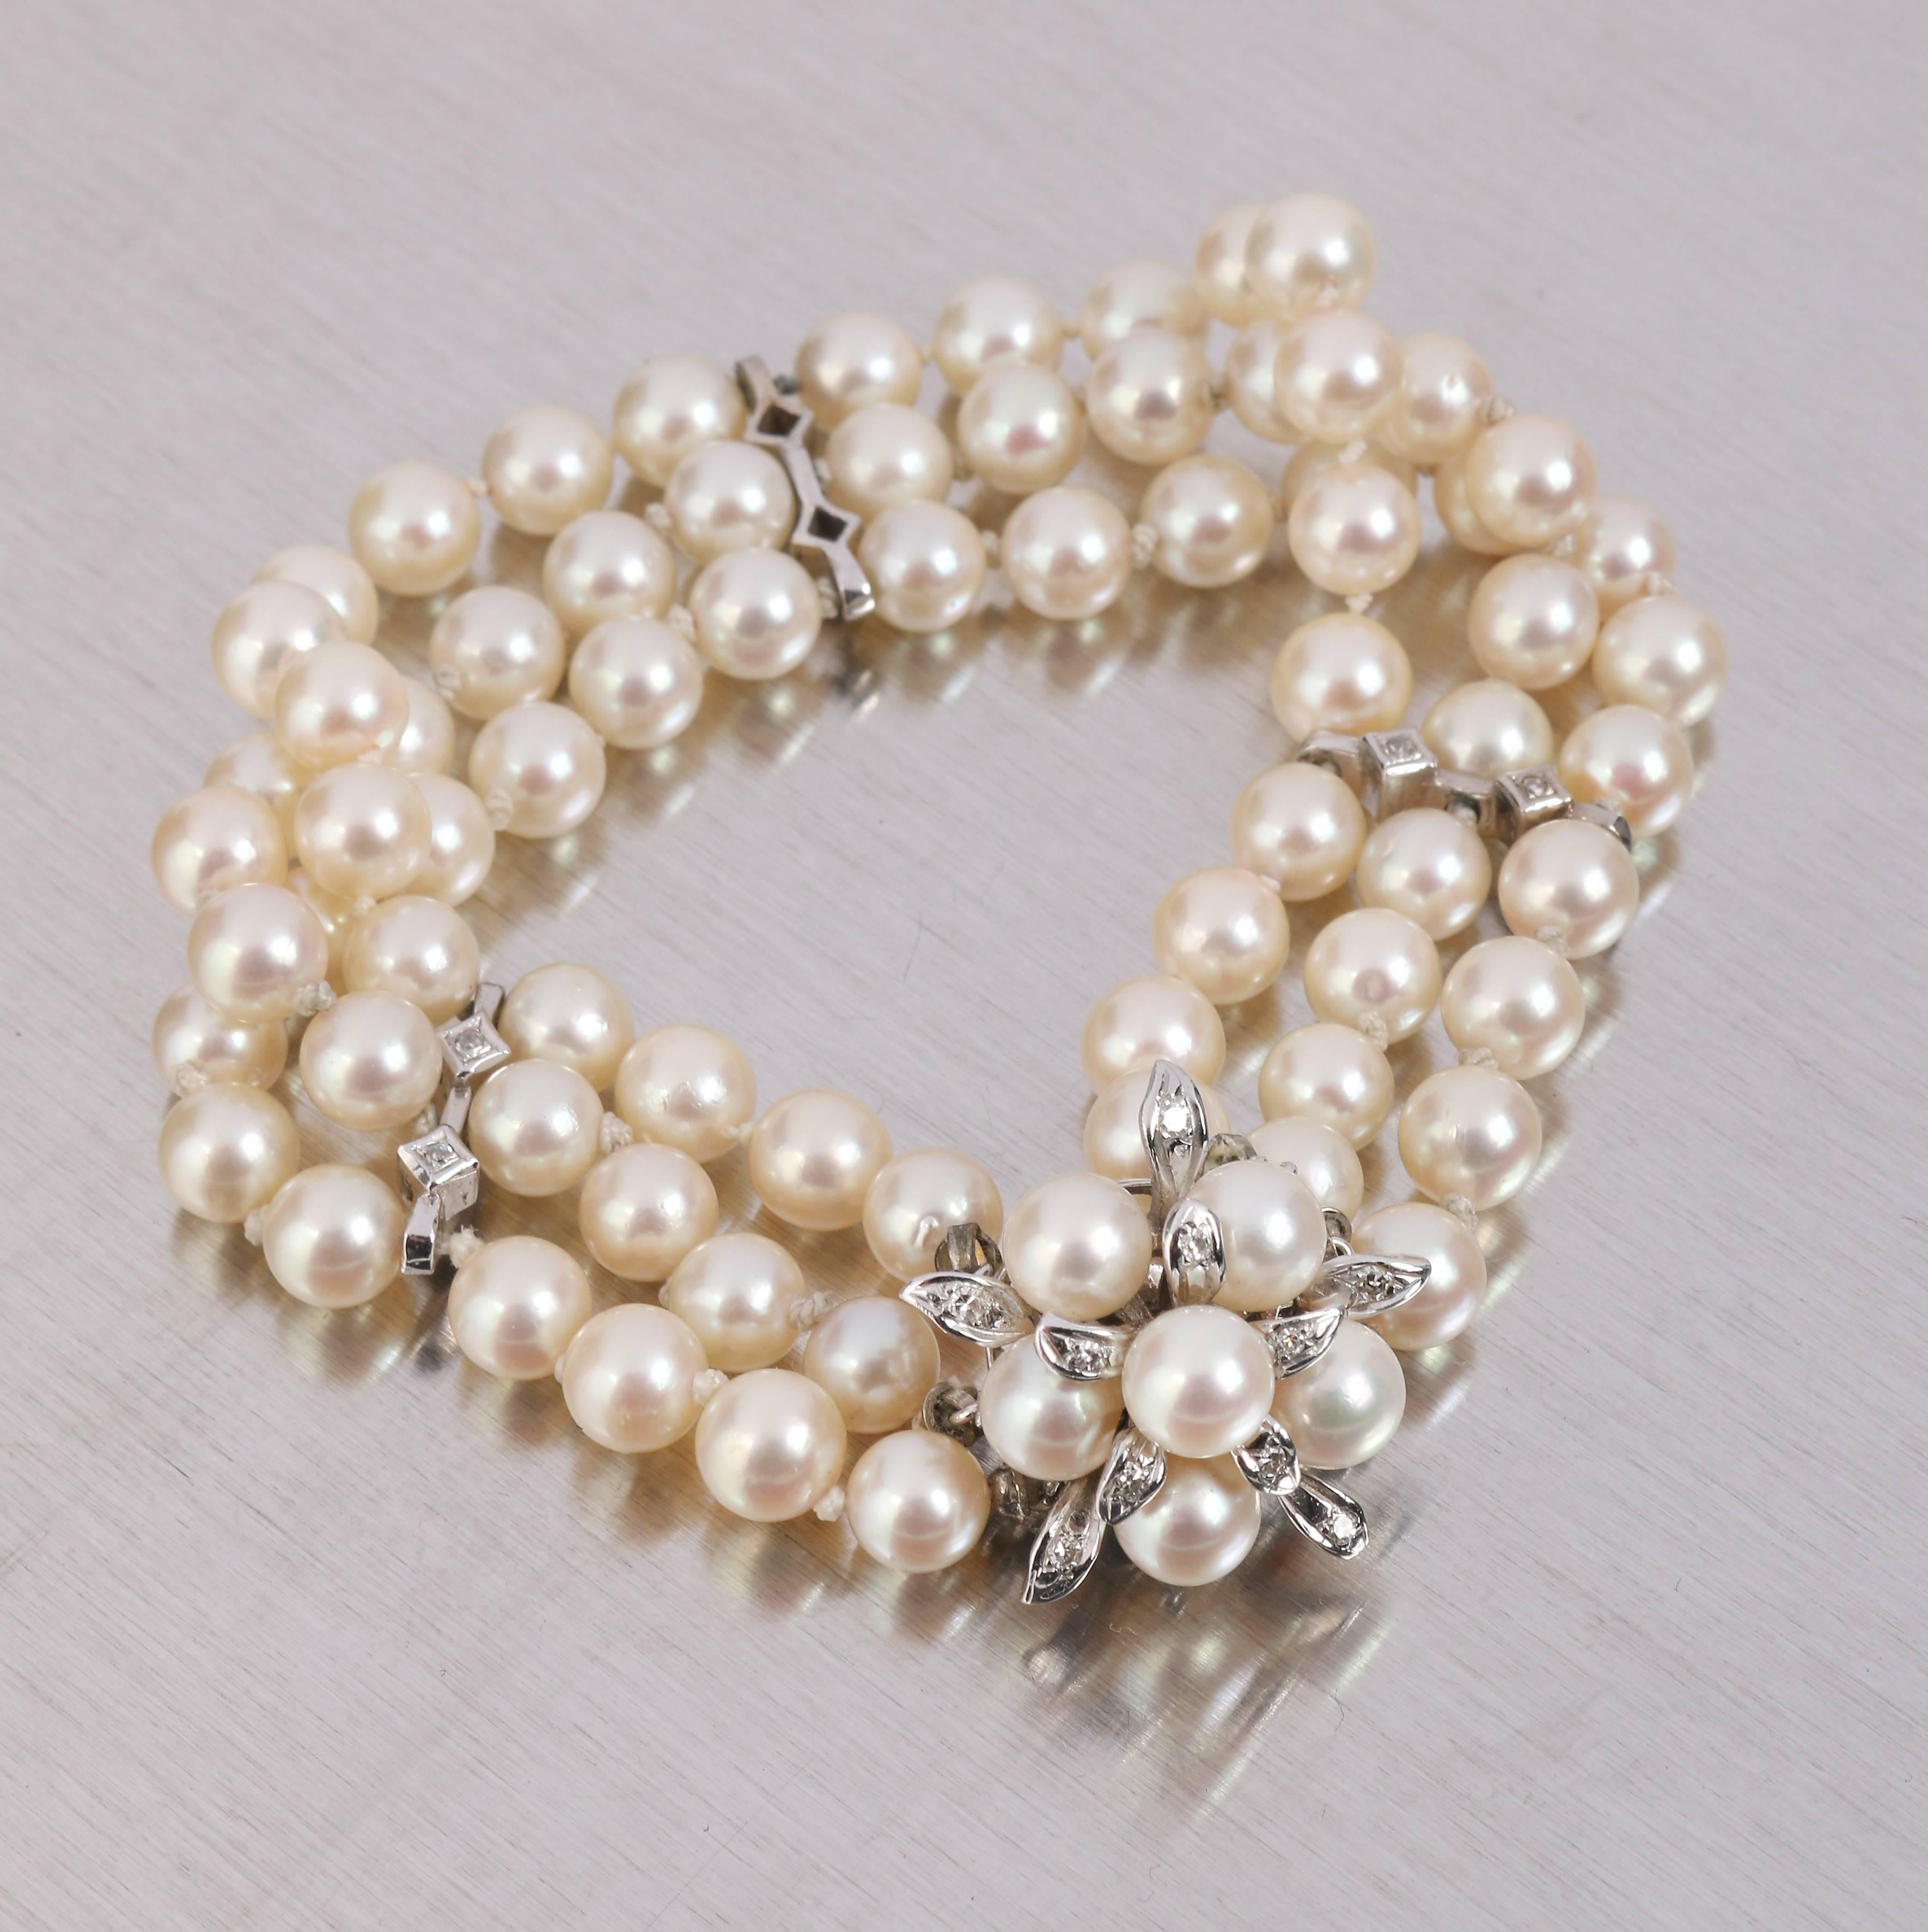 Vintage c.1950's Cultured Pearl 3 strand bracelet with 14 kt white gold clasp and spacers. Pearls have a creamy white color with a subtle rose tone (measure approximately 6 to 6.5 mm). The bracelet is divided into 2 sections of 24 pearls, 2 sections